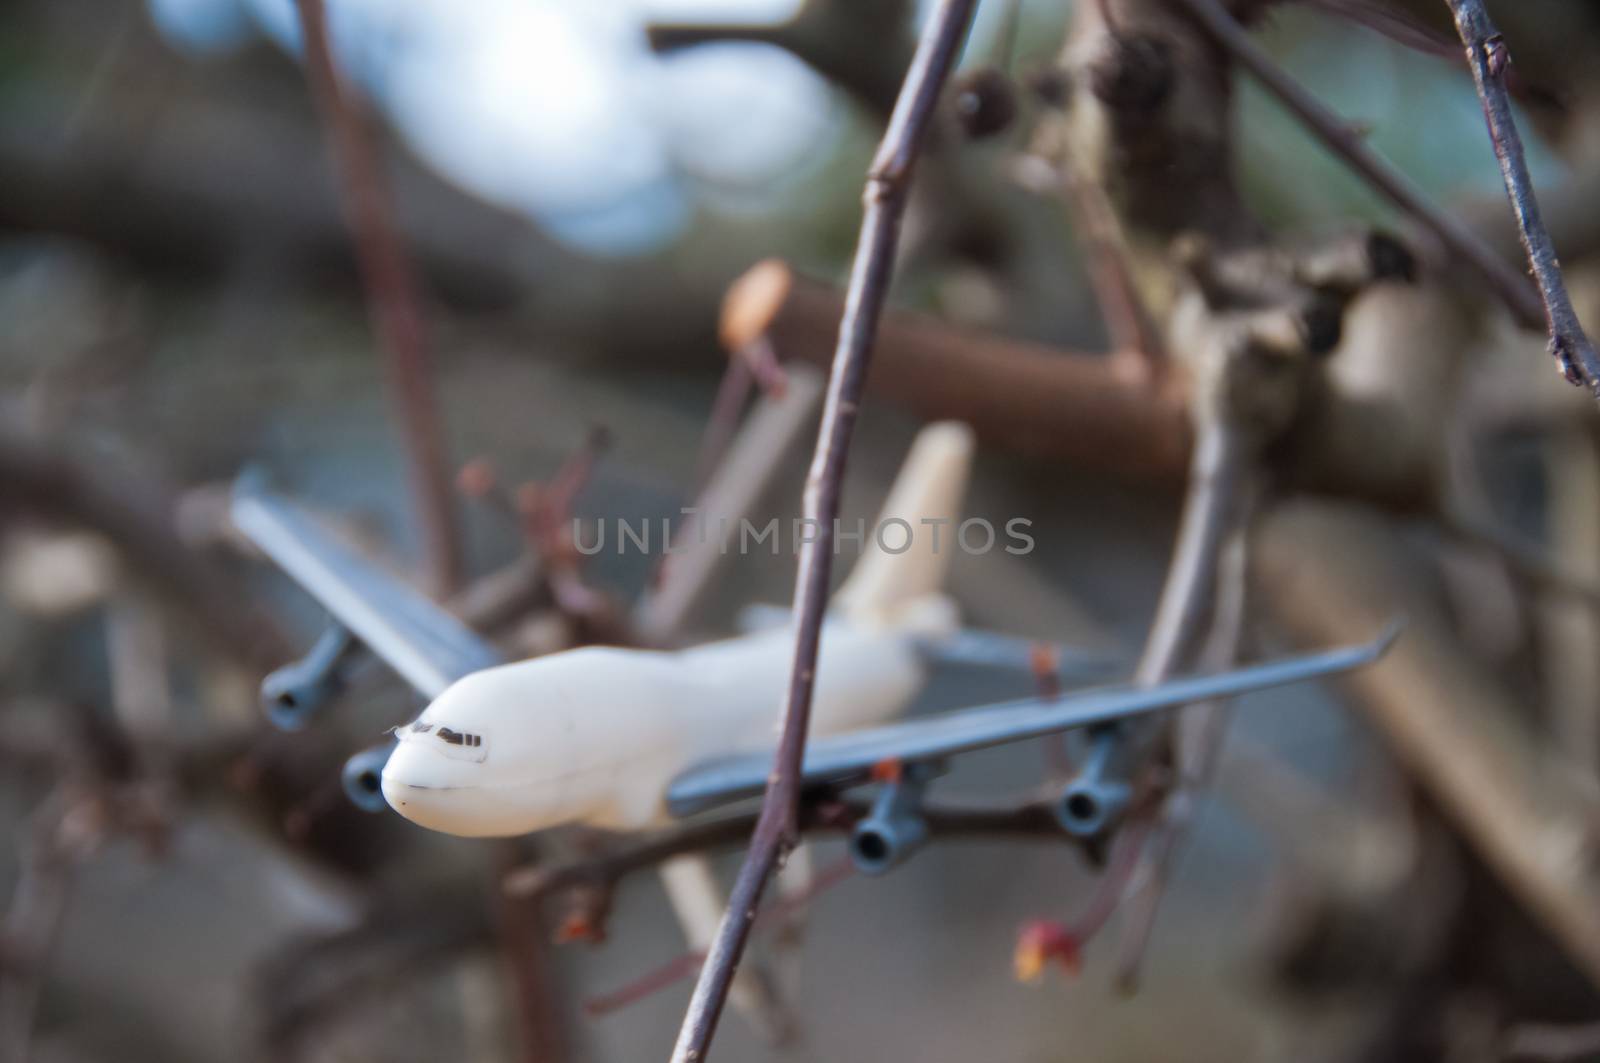 Model toy plane close-up in a forest